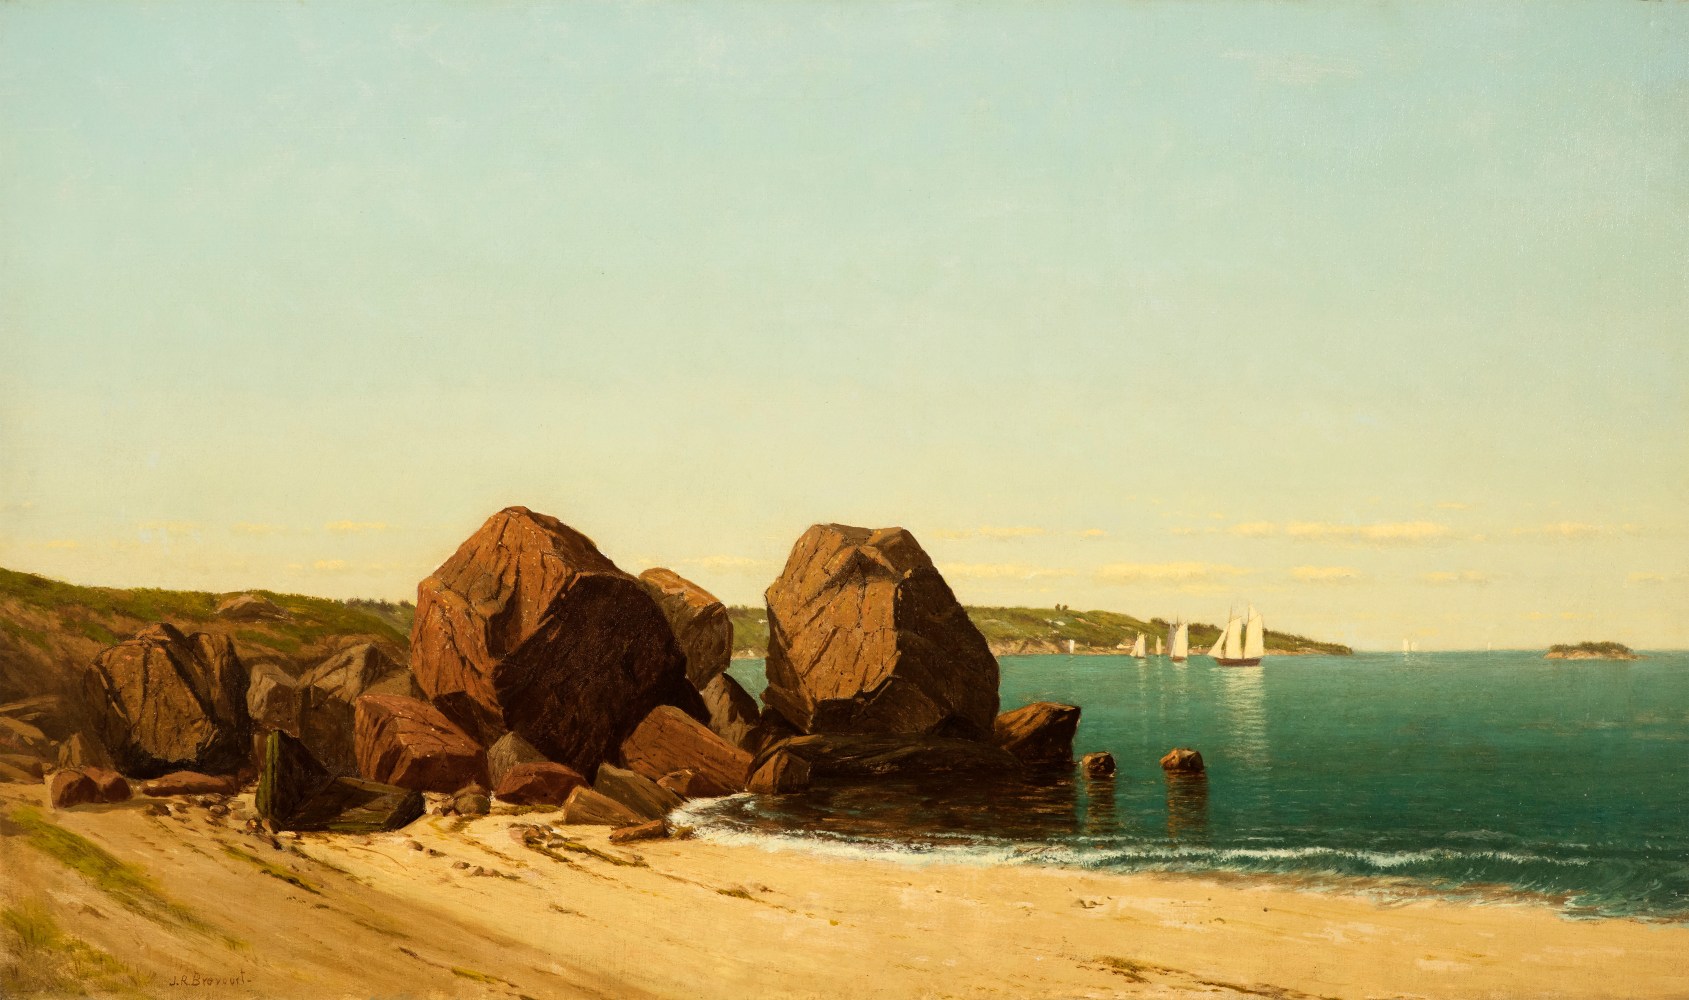 James R. Brevoort (1832–1918), Half Moon Cove at Gloucester Bay, c. 1870, oil on canvas, 18 x 30 in., signed lower left: J. R. Brevoort